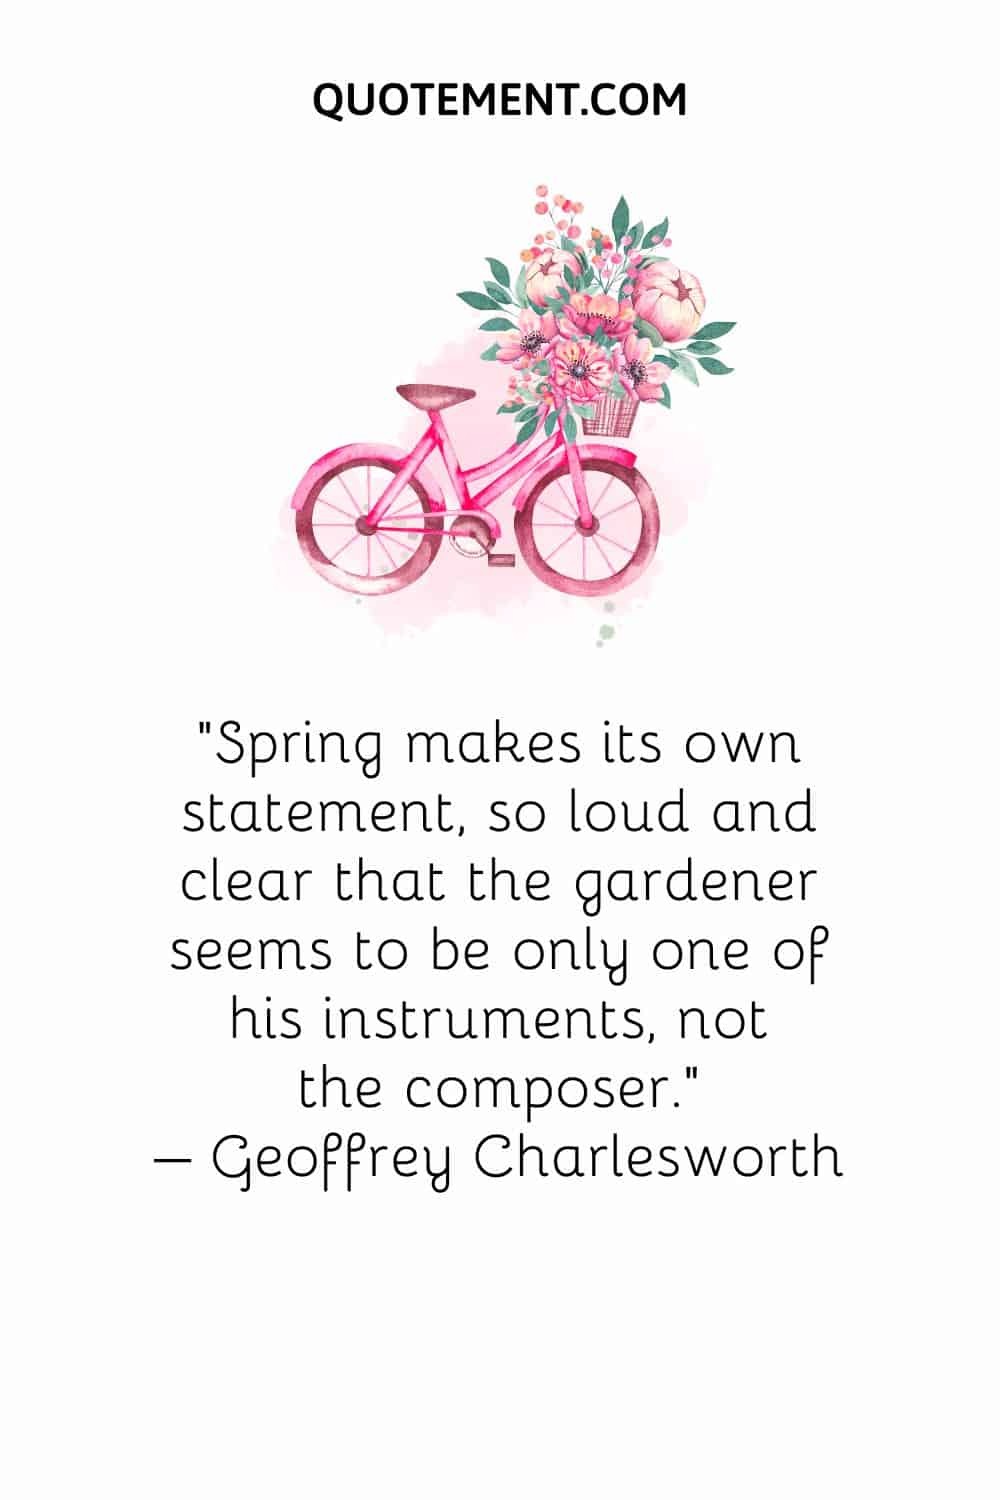 Spring makes its own statement, so loud and clear that the gardener seems to be only one of his instruments, not the composer. – Geoffrey Charlesworth